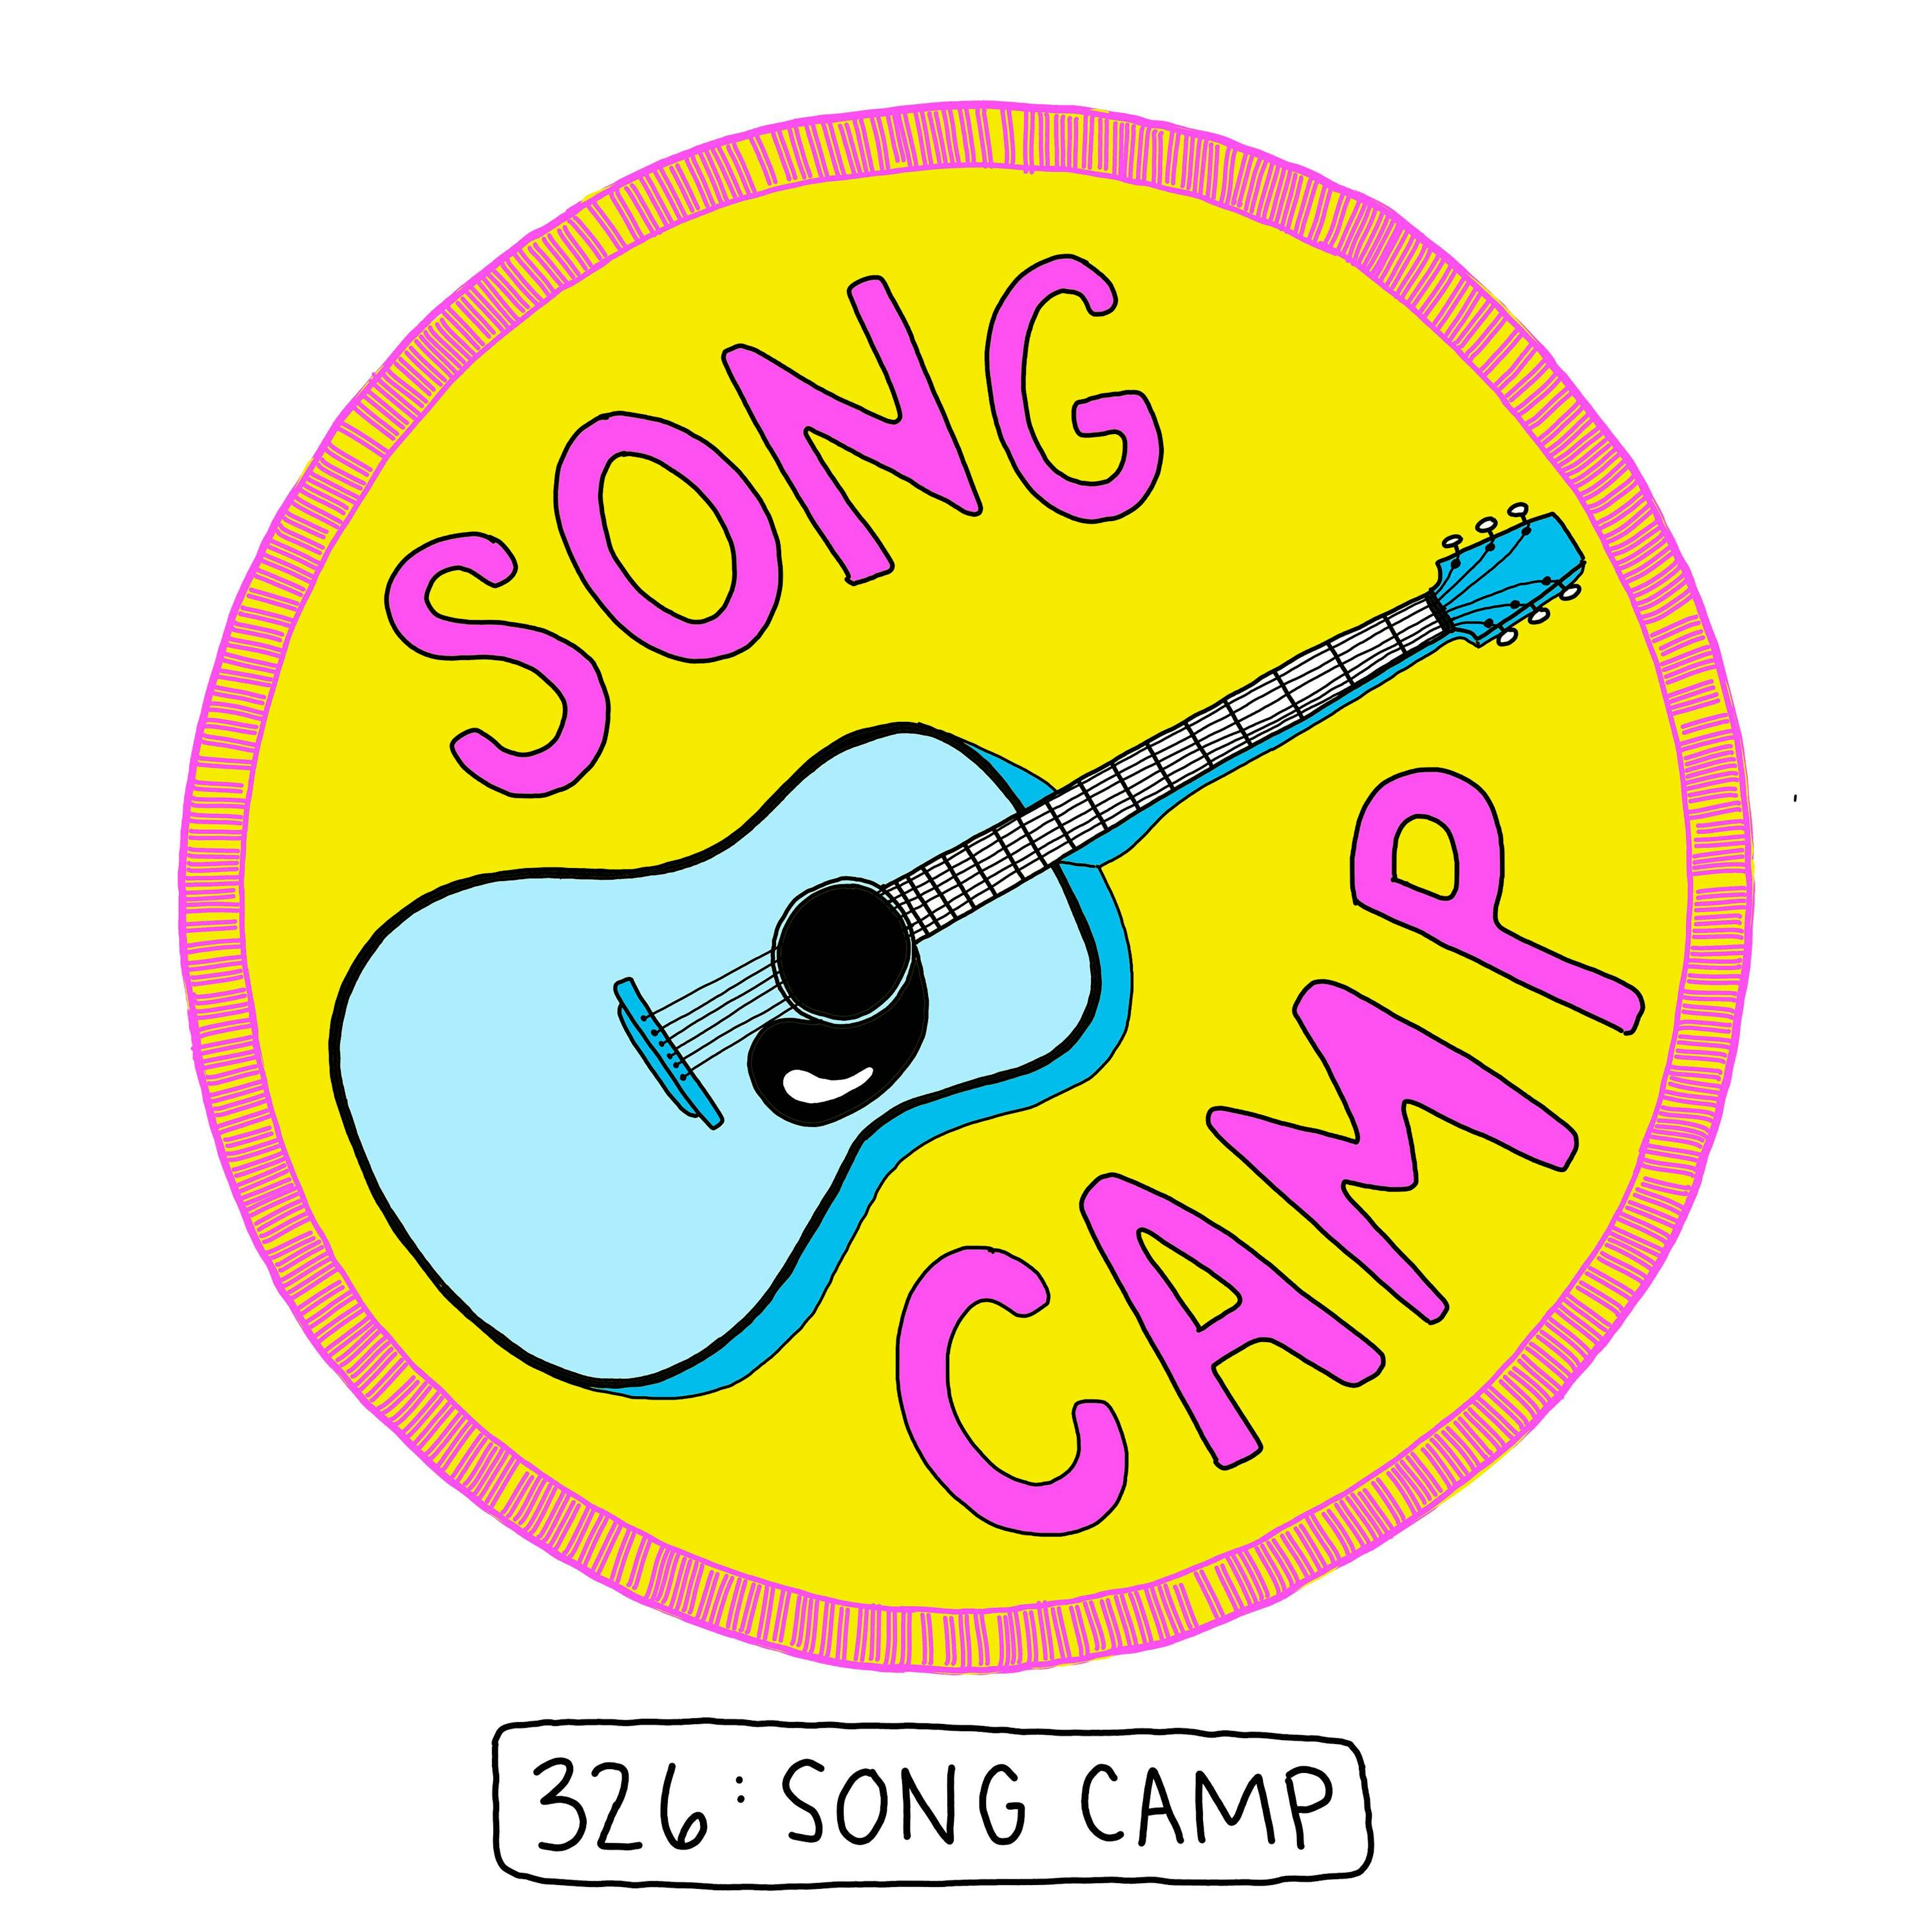 The secret world of songwriting camps